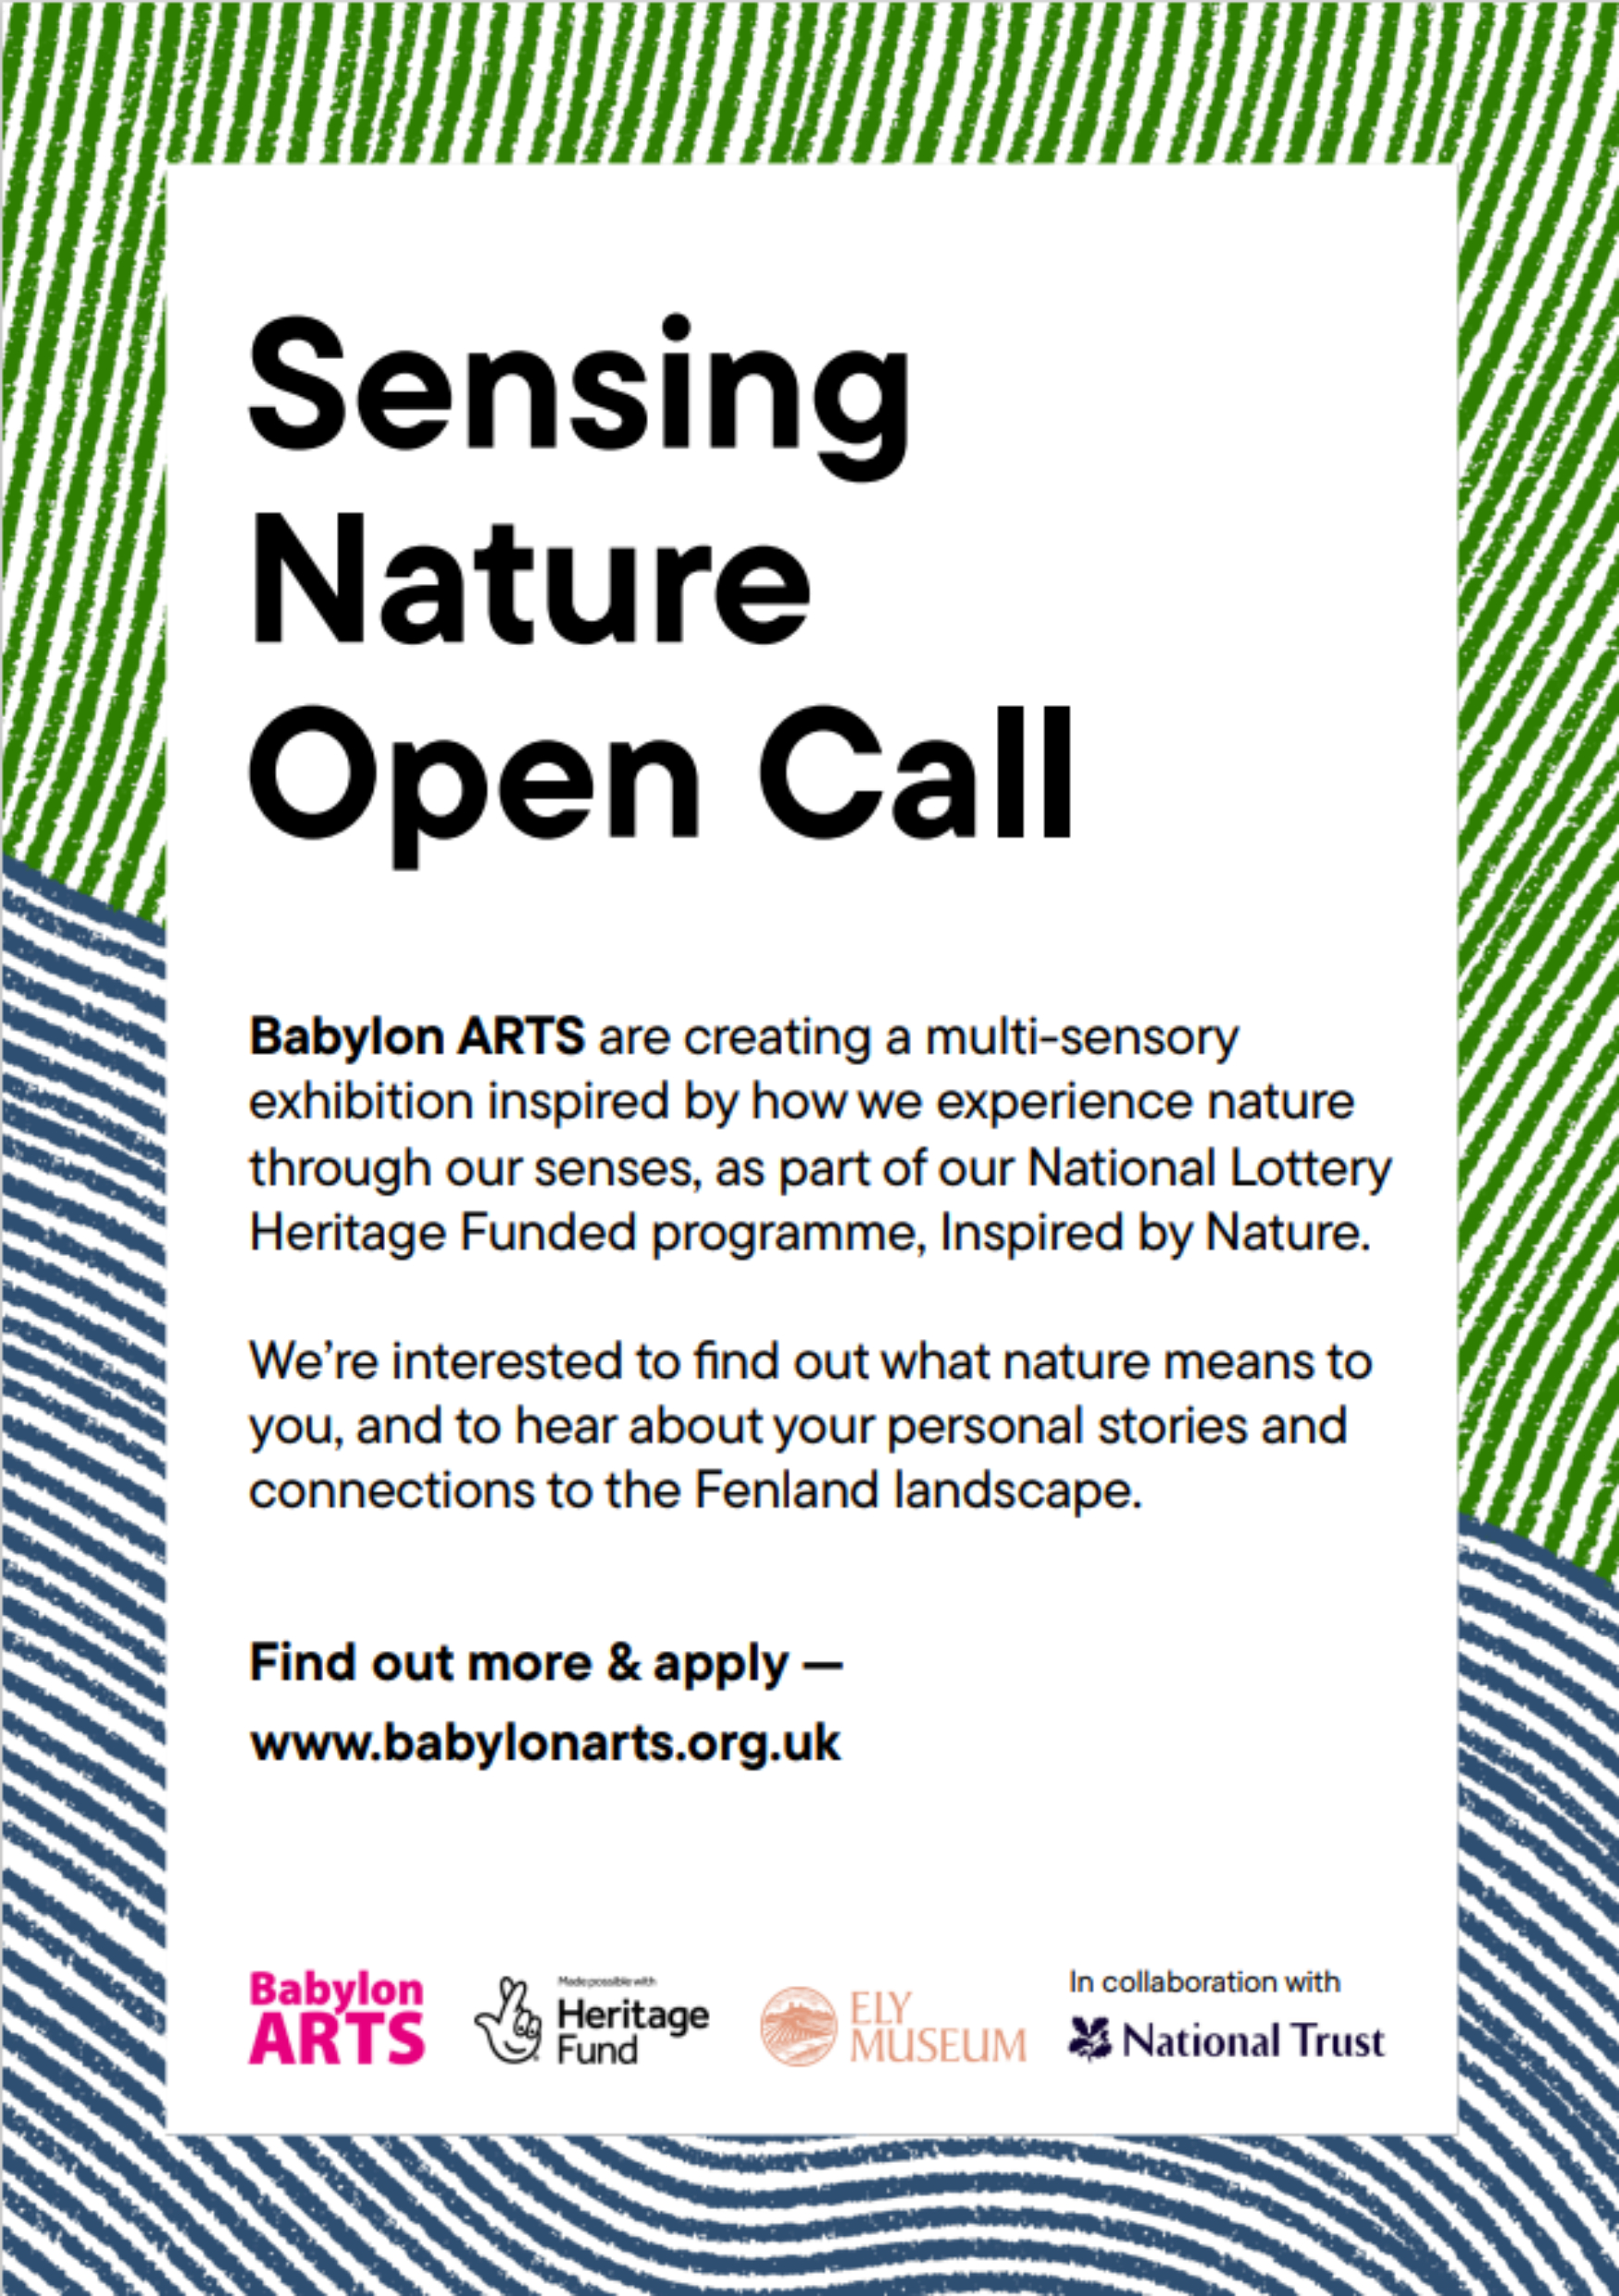 Babylon ARTS are creating a multi-sensory exhibition inspired by how we experience nature through our senses, as part of our National Lottery Heritage Funded programme, Inspired by Nature.  We’re interested to find out what nature means to you, and to hear about your personal stories and connections to the Fenland landscape.  Find out more and apply at www.babylonarts.org.uk